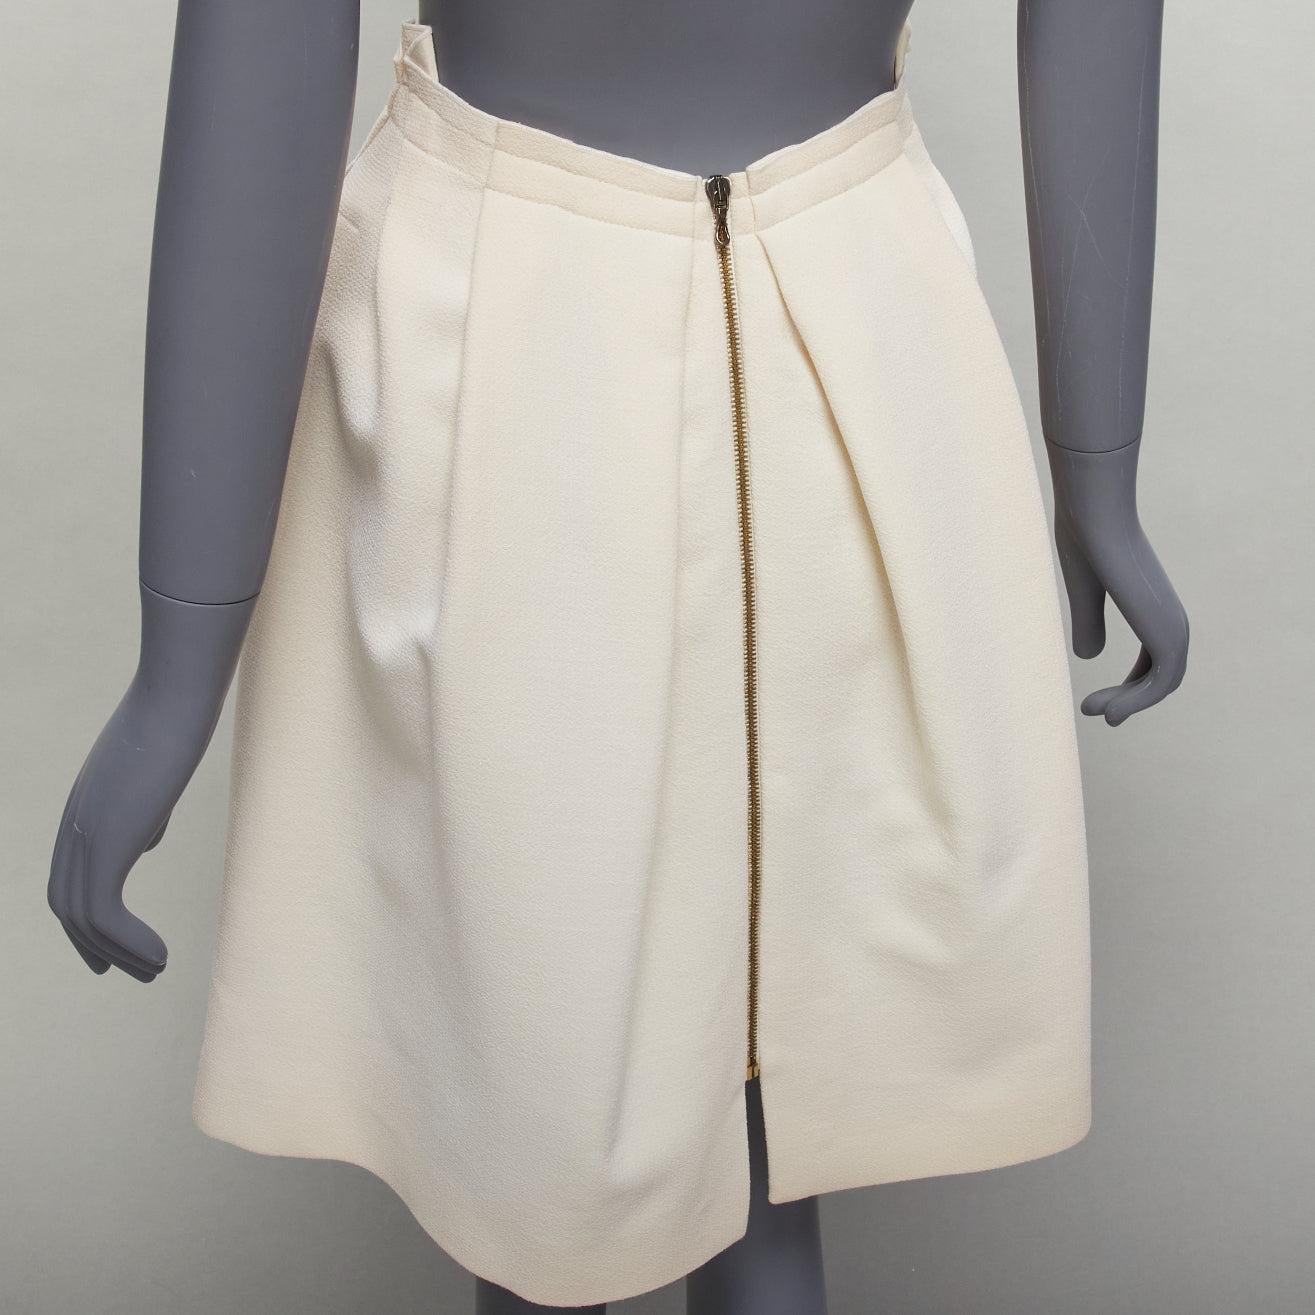 ROLAND MOURET cream wool crepe silk trim origami fold pleat waist A-line skirt UK6 XS
Reference: SNKO/A00304
Brand: Roland Mouret
Material: Wool, Silk
Color: Cream
Pattern: Solid
Closure: Zip
Lining: Cream Fabric
Extra Details: Zip back detail.
Made